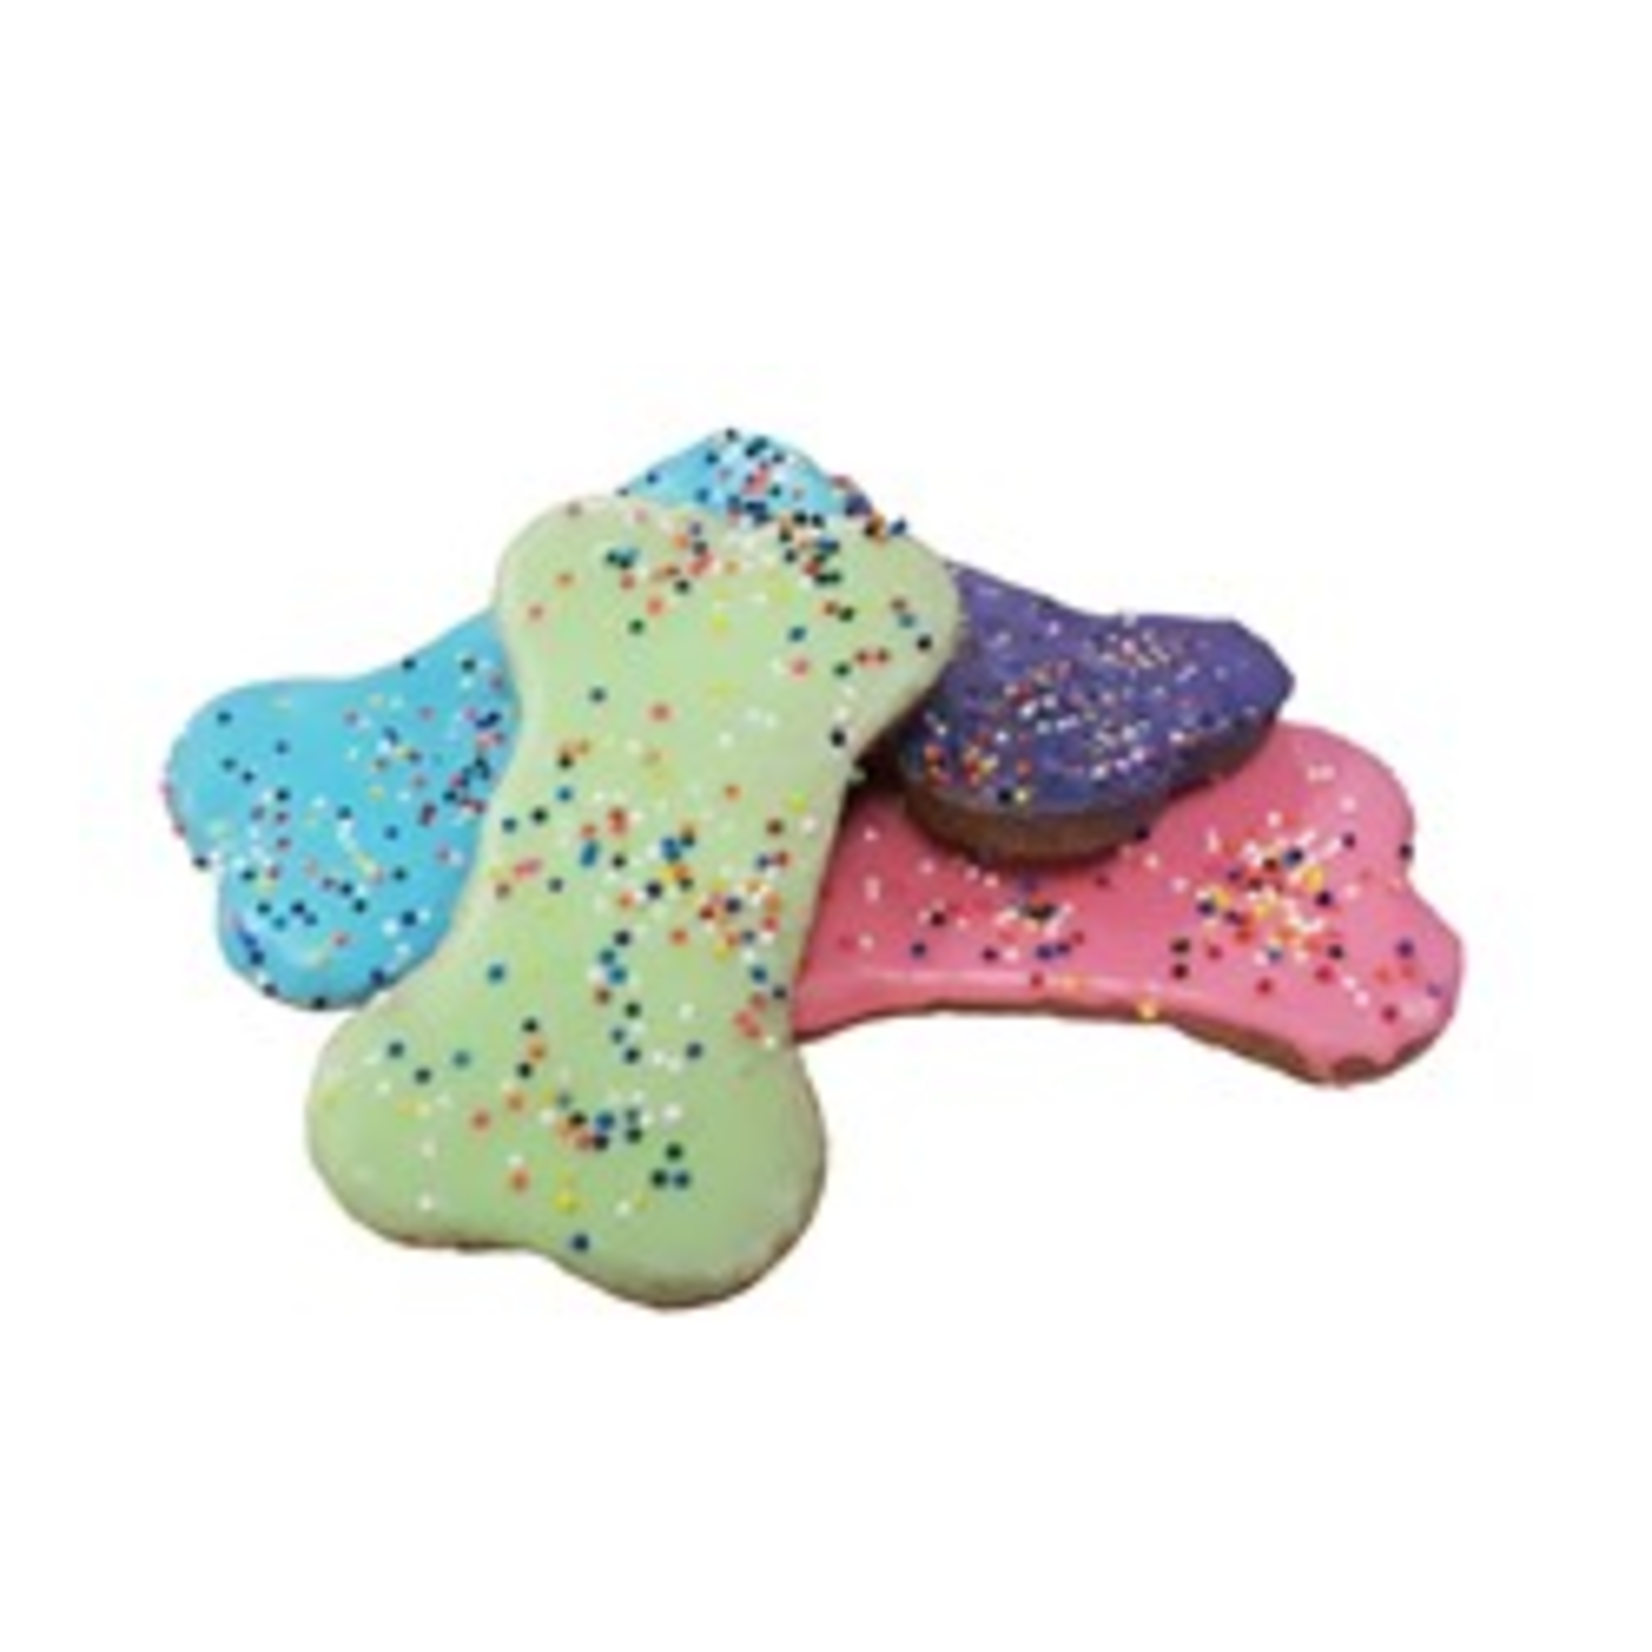 Pawsitively Gourmet Pawsitively Gourmet Cookies - SMALL ASSORTED